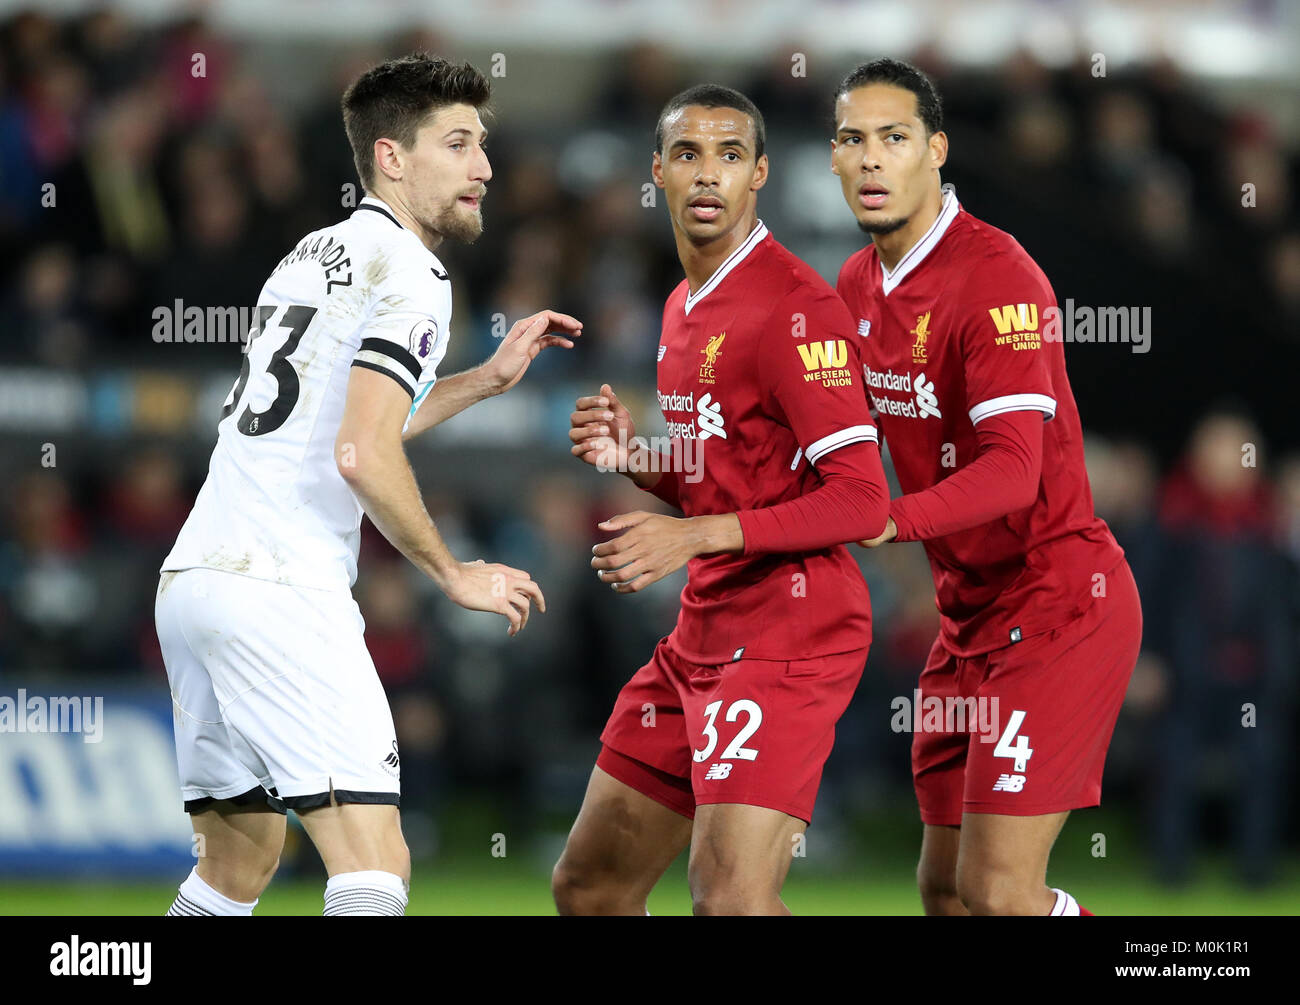 Liverpool's Joel Matip (centre) and Virgil van Dijk prepare to attack a corner, watched by Swansea City's Federico Fernandez during the Premier League match at the Liberty Stadium, Swansea. Stock Photo